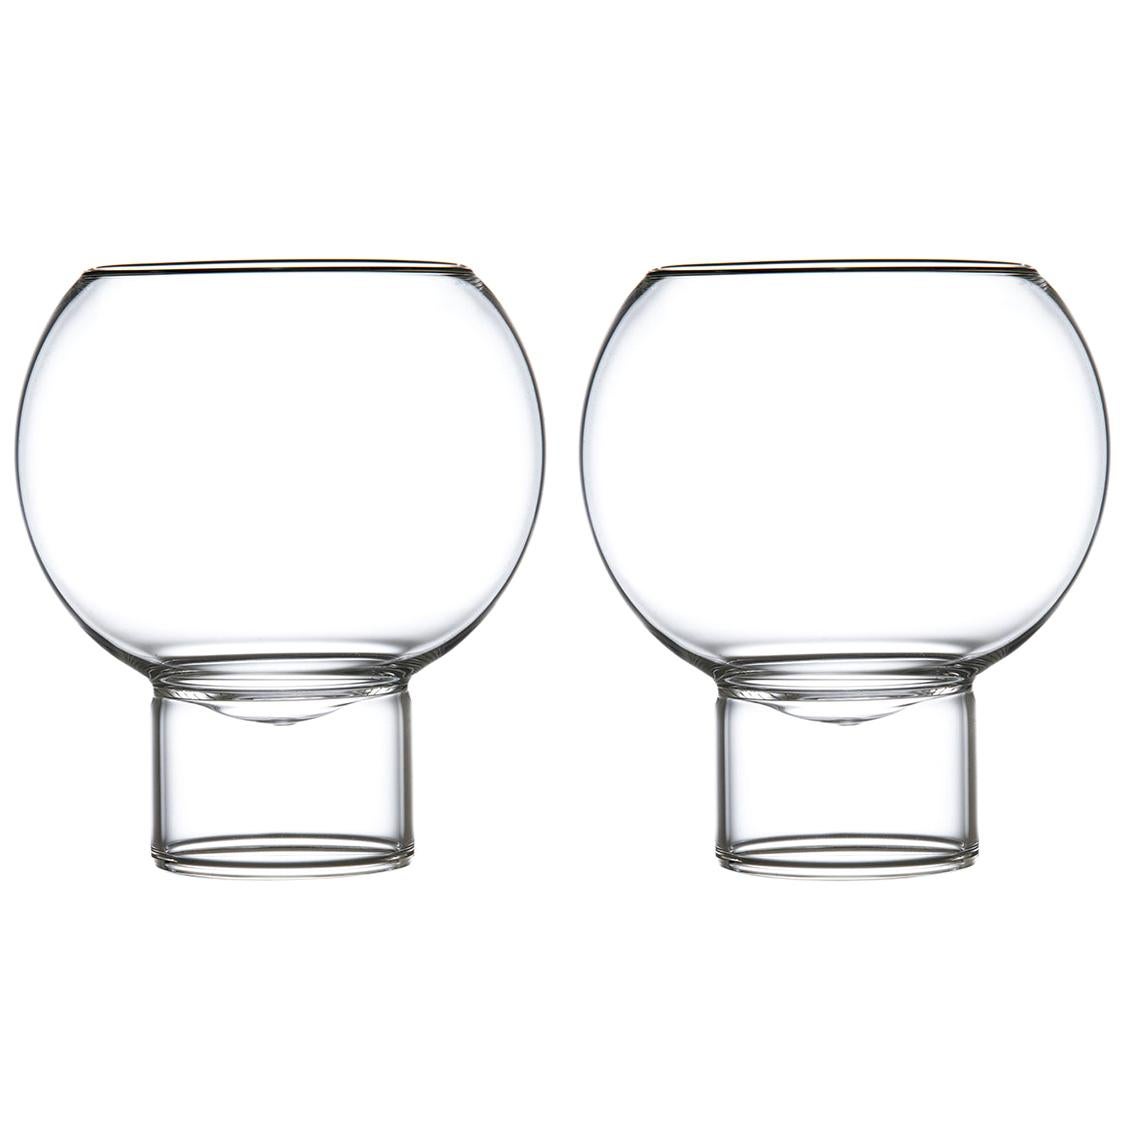 Pair of Czech Contemporary Tulip Low Small Wine Glasses Handmade, in Stock